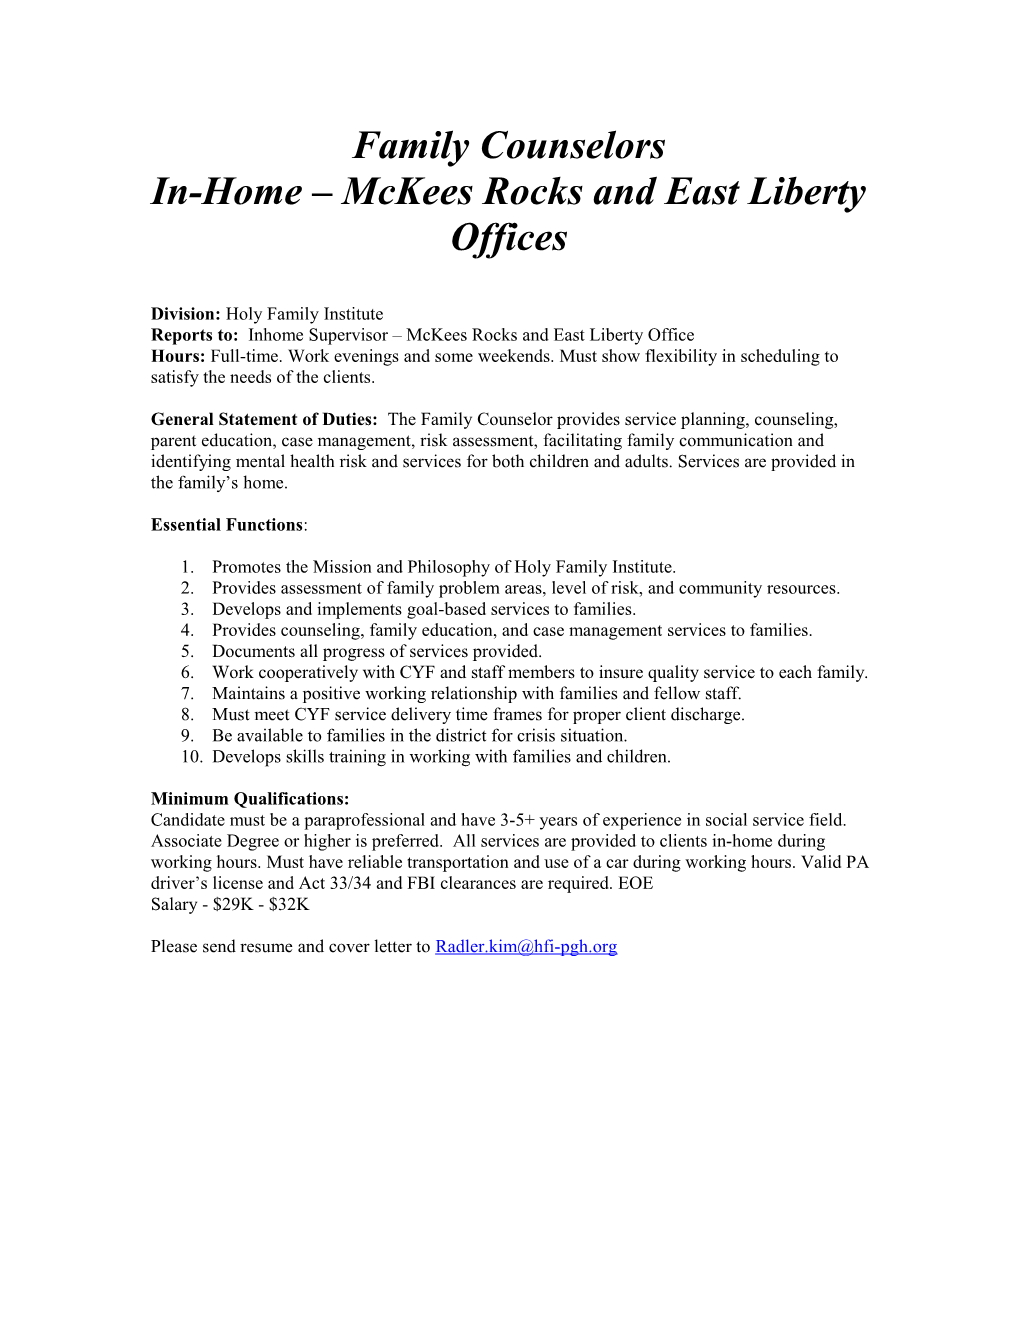 In-Home Mckees Rocks and East Liberty Offices